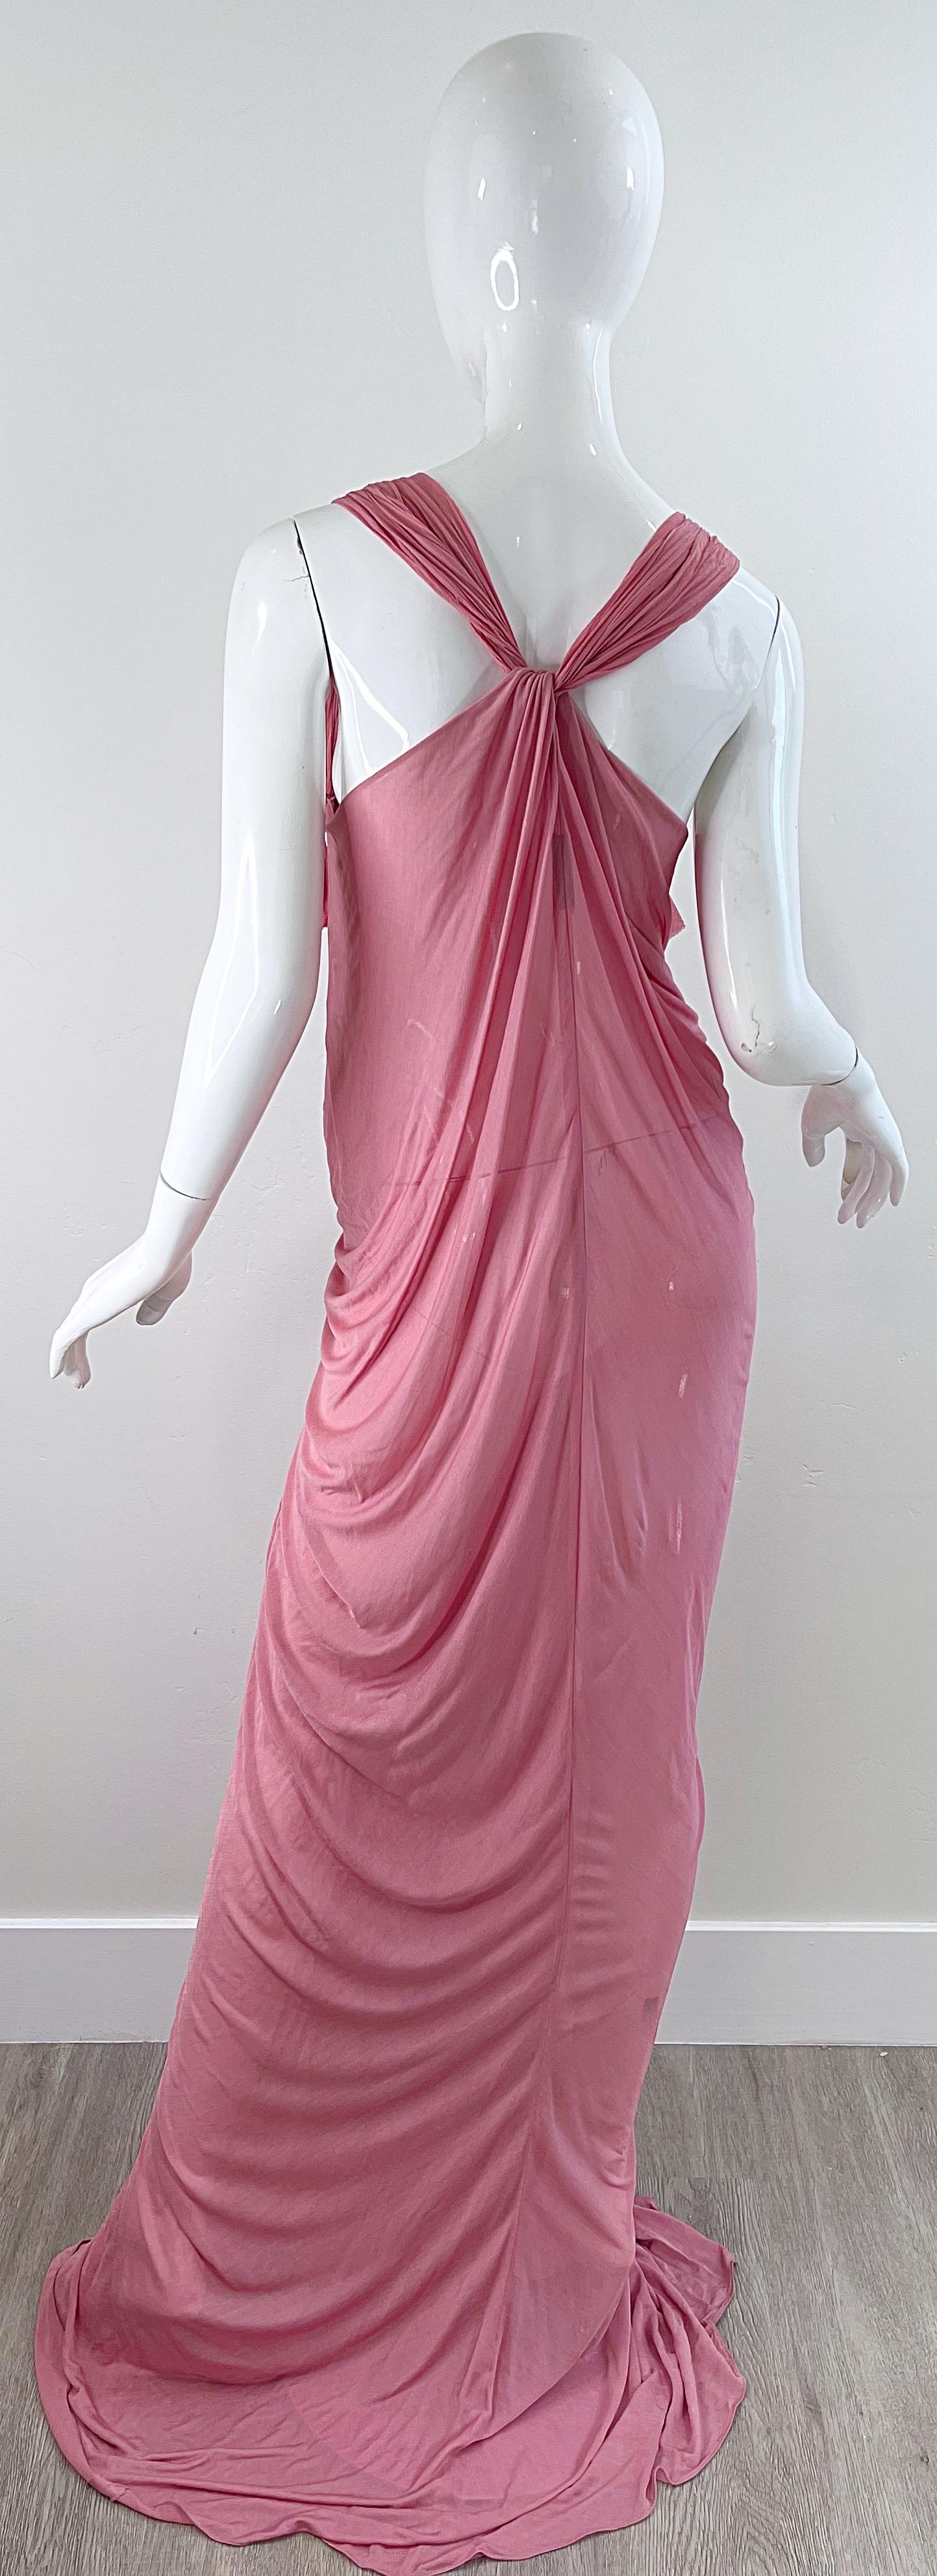 NWT Donna Karan Fall 2005 Pink Dusty Rose Mauve 30s Style Semi Sheer Gown Dress For Sale 8